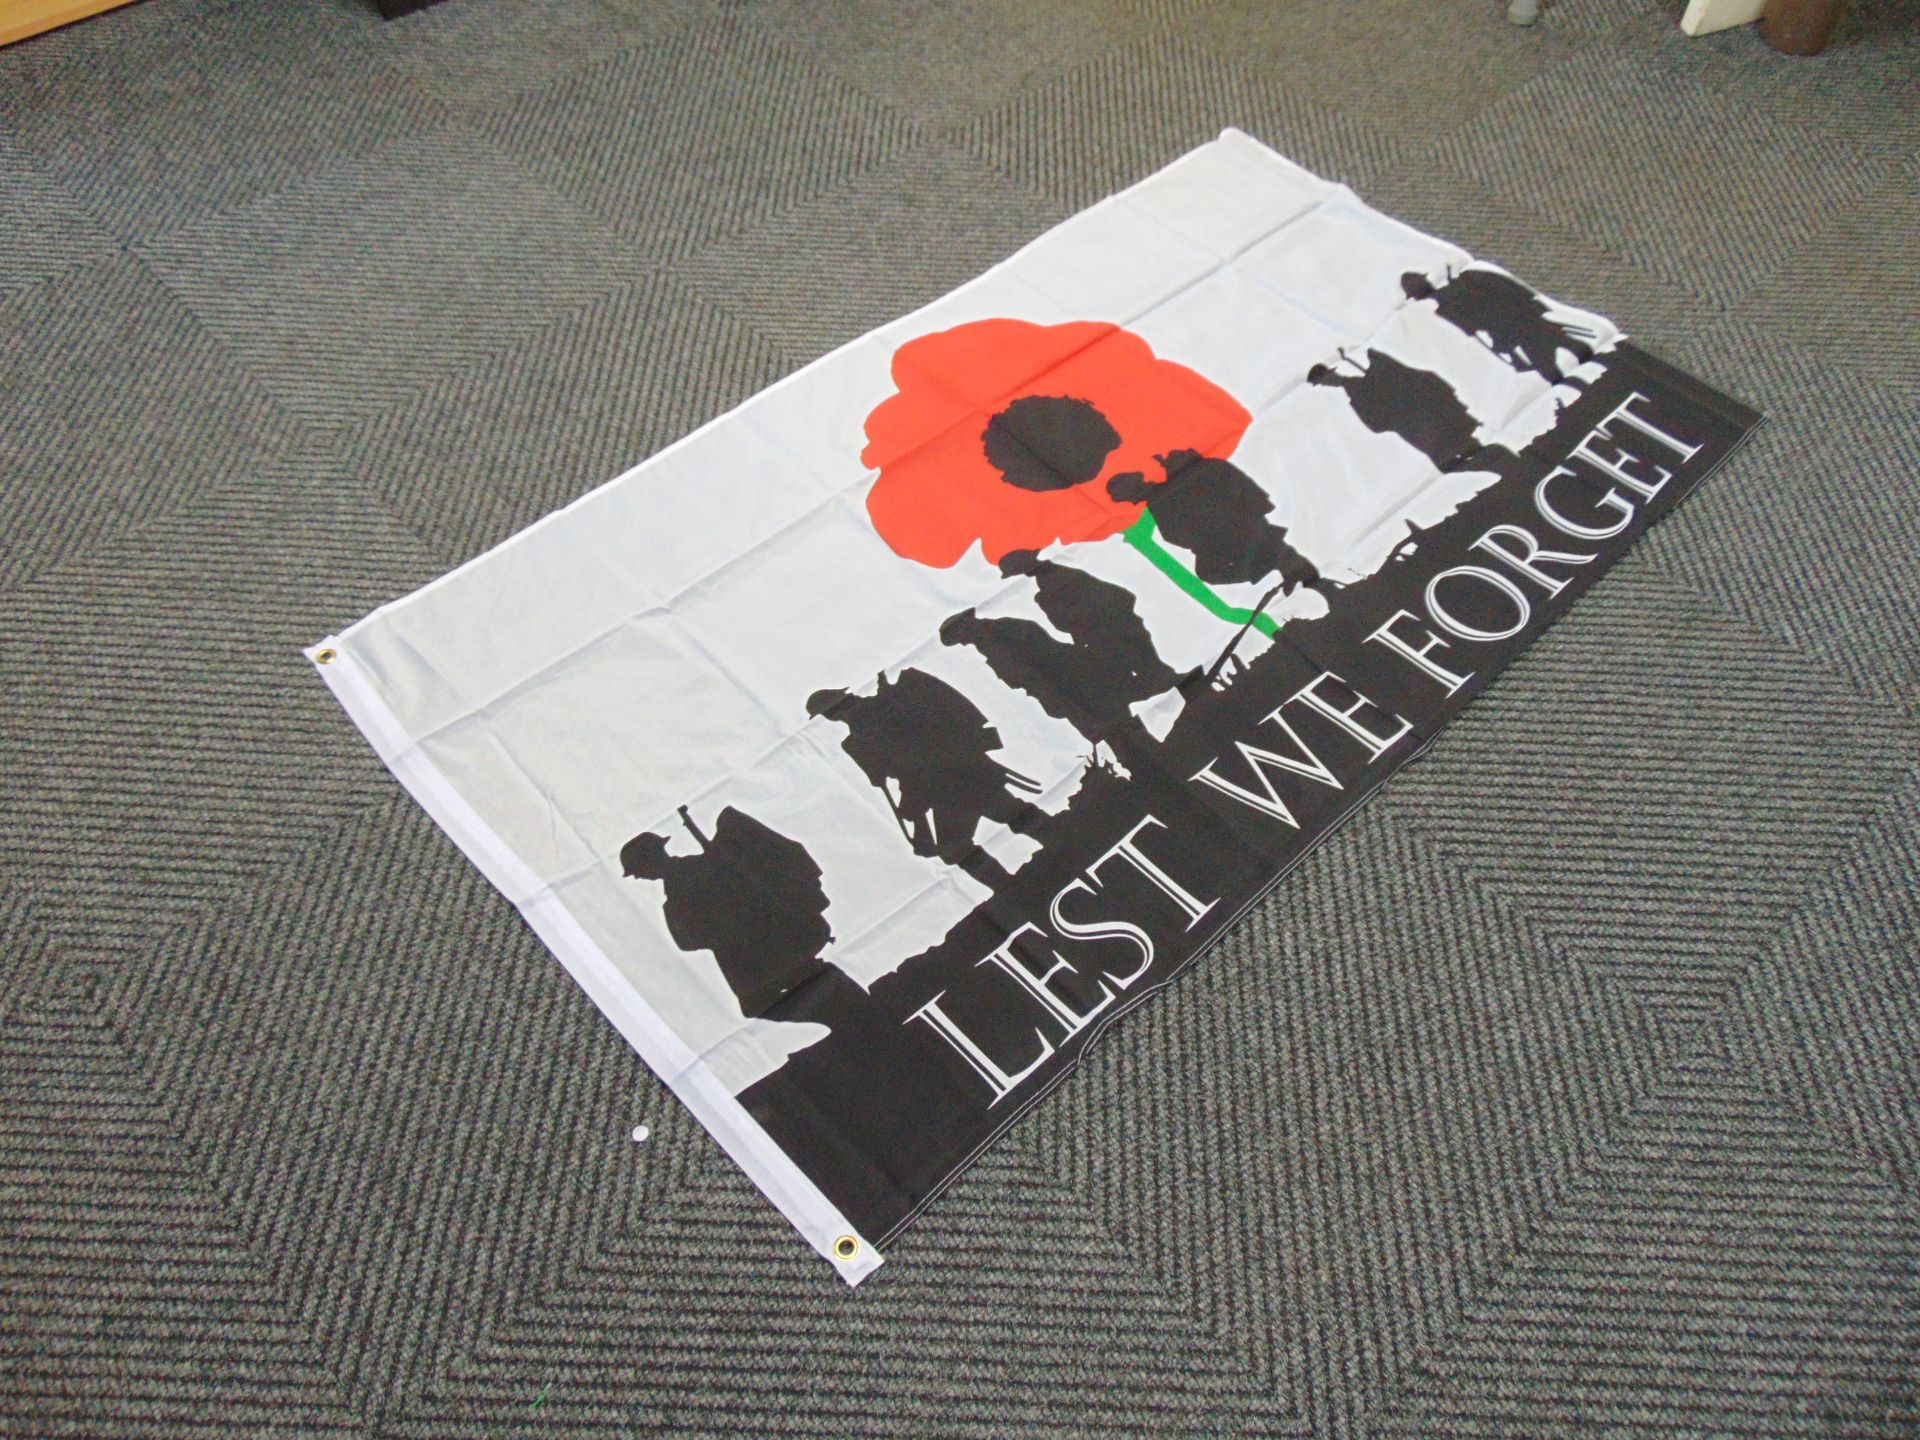 Lest We Forget (Army) Flag - 5ft x 3ft with Metal Eyelets. - Image 3 of 3